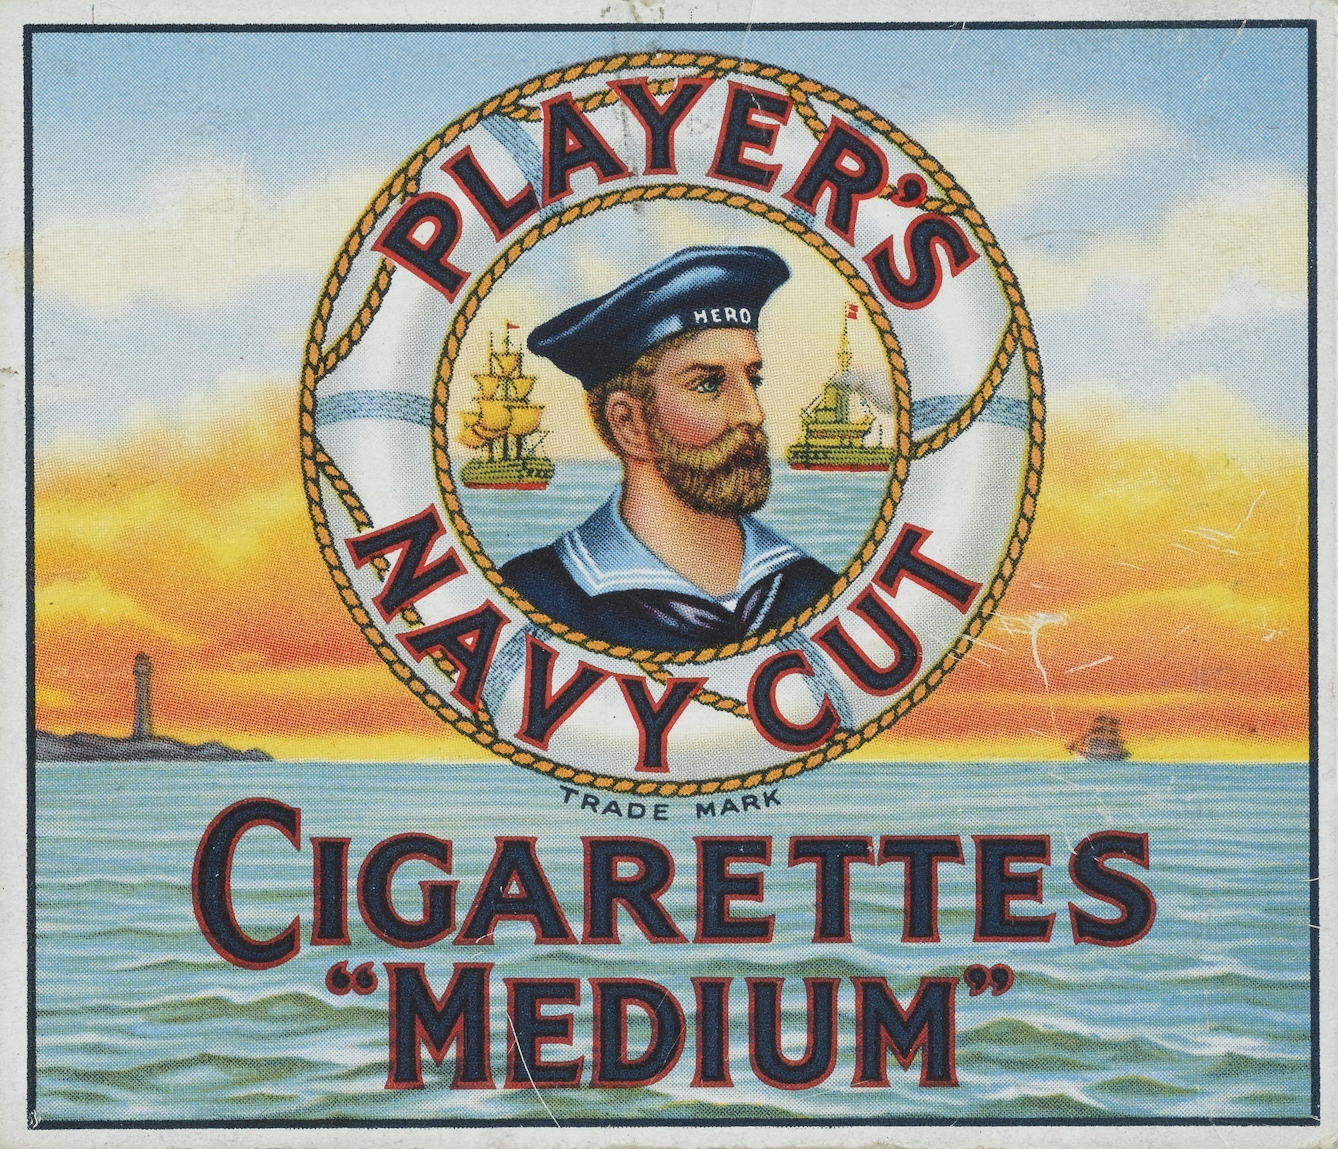 Player's cigarettes advertisement with sailor's head